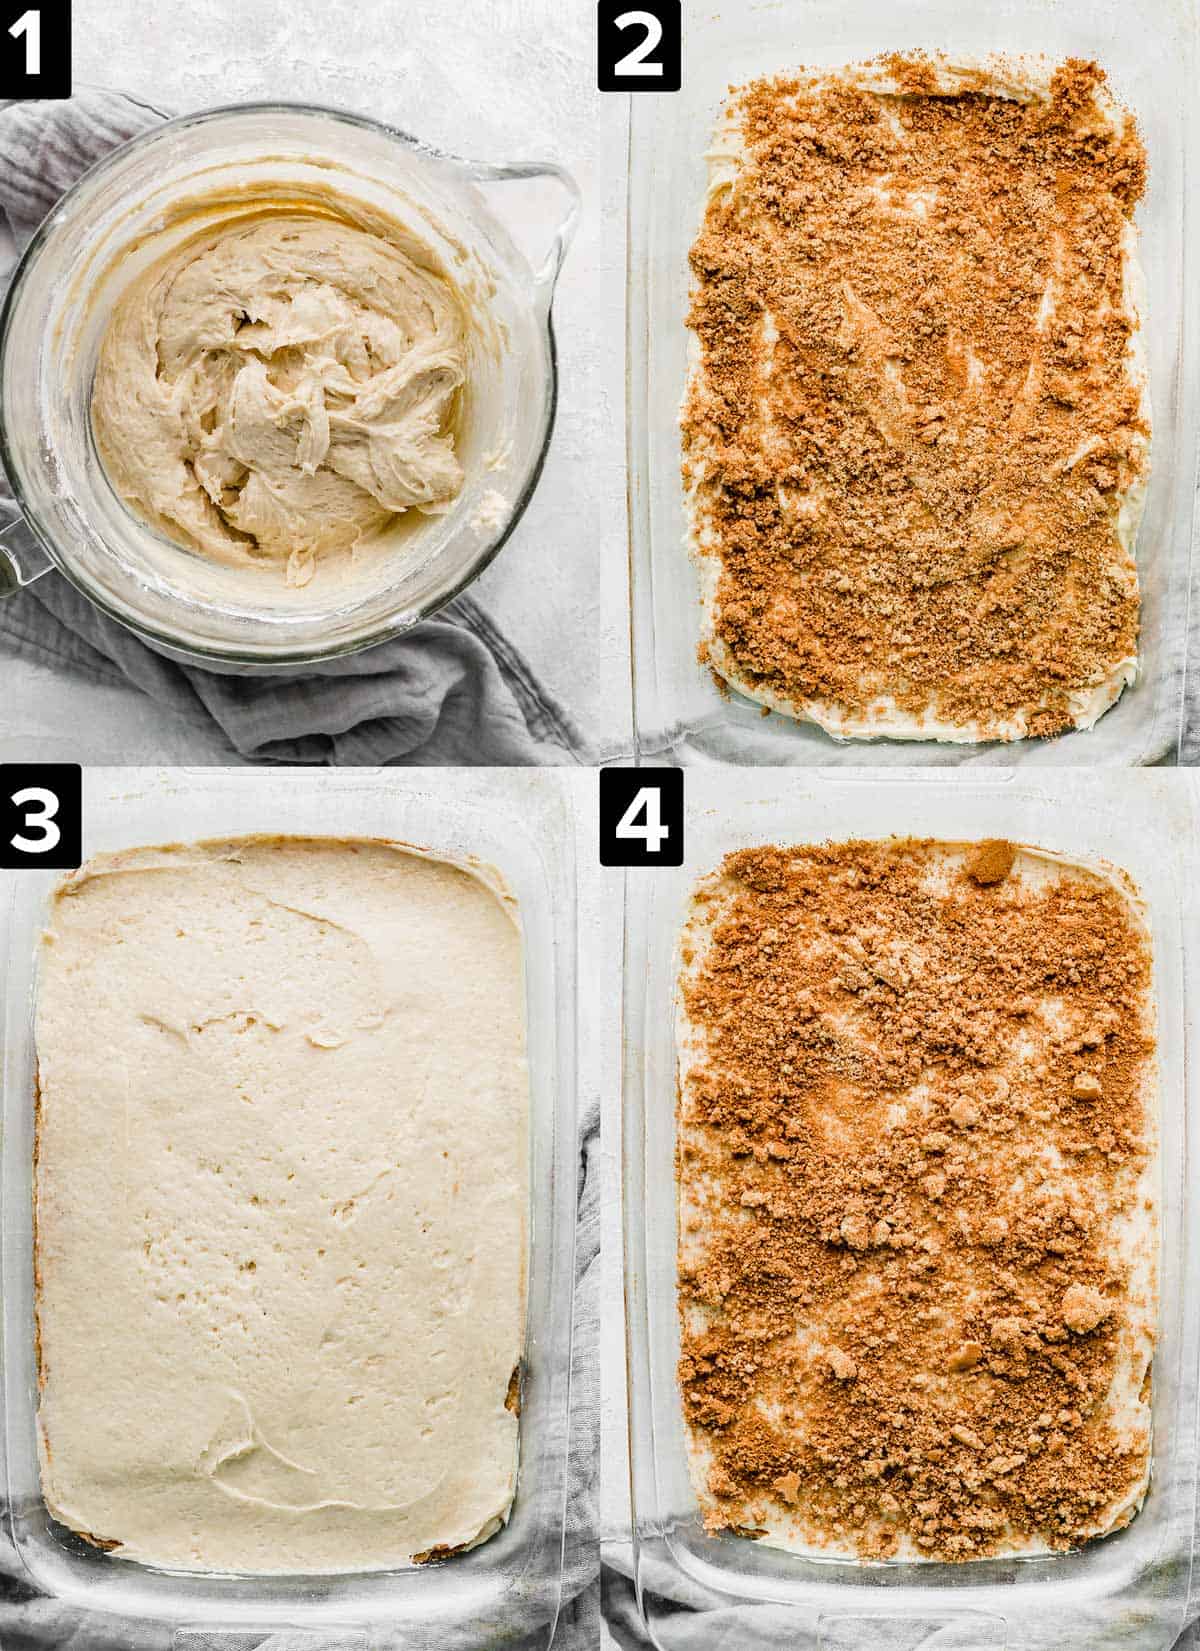 Four images showing the making of a Cinnamon Roll Cake, top left has Cinnamon Roll Cake batter in a glass bowl, top right has cinnamon sugar coated cake batter, bottom left and bottom right is the Cinnamon Roll Cake in a rectangle pan.